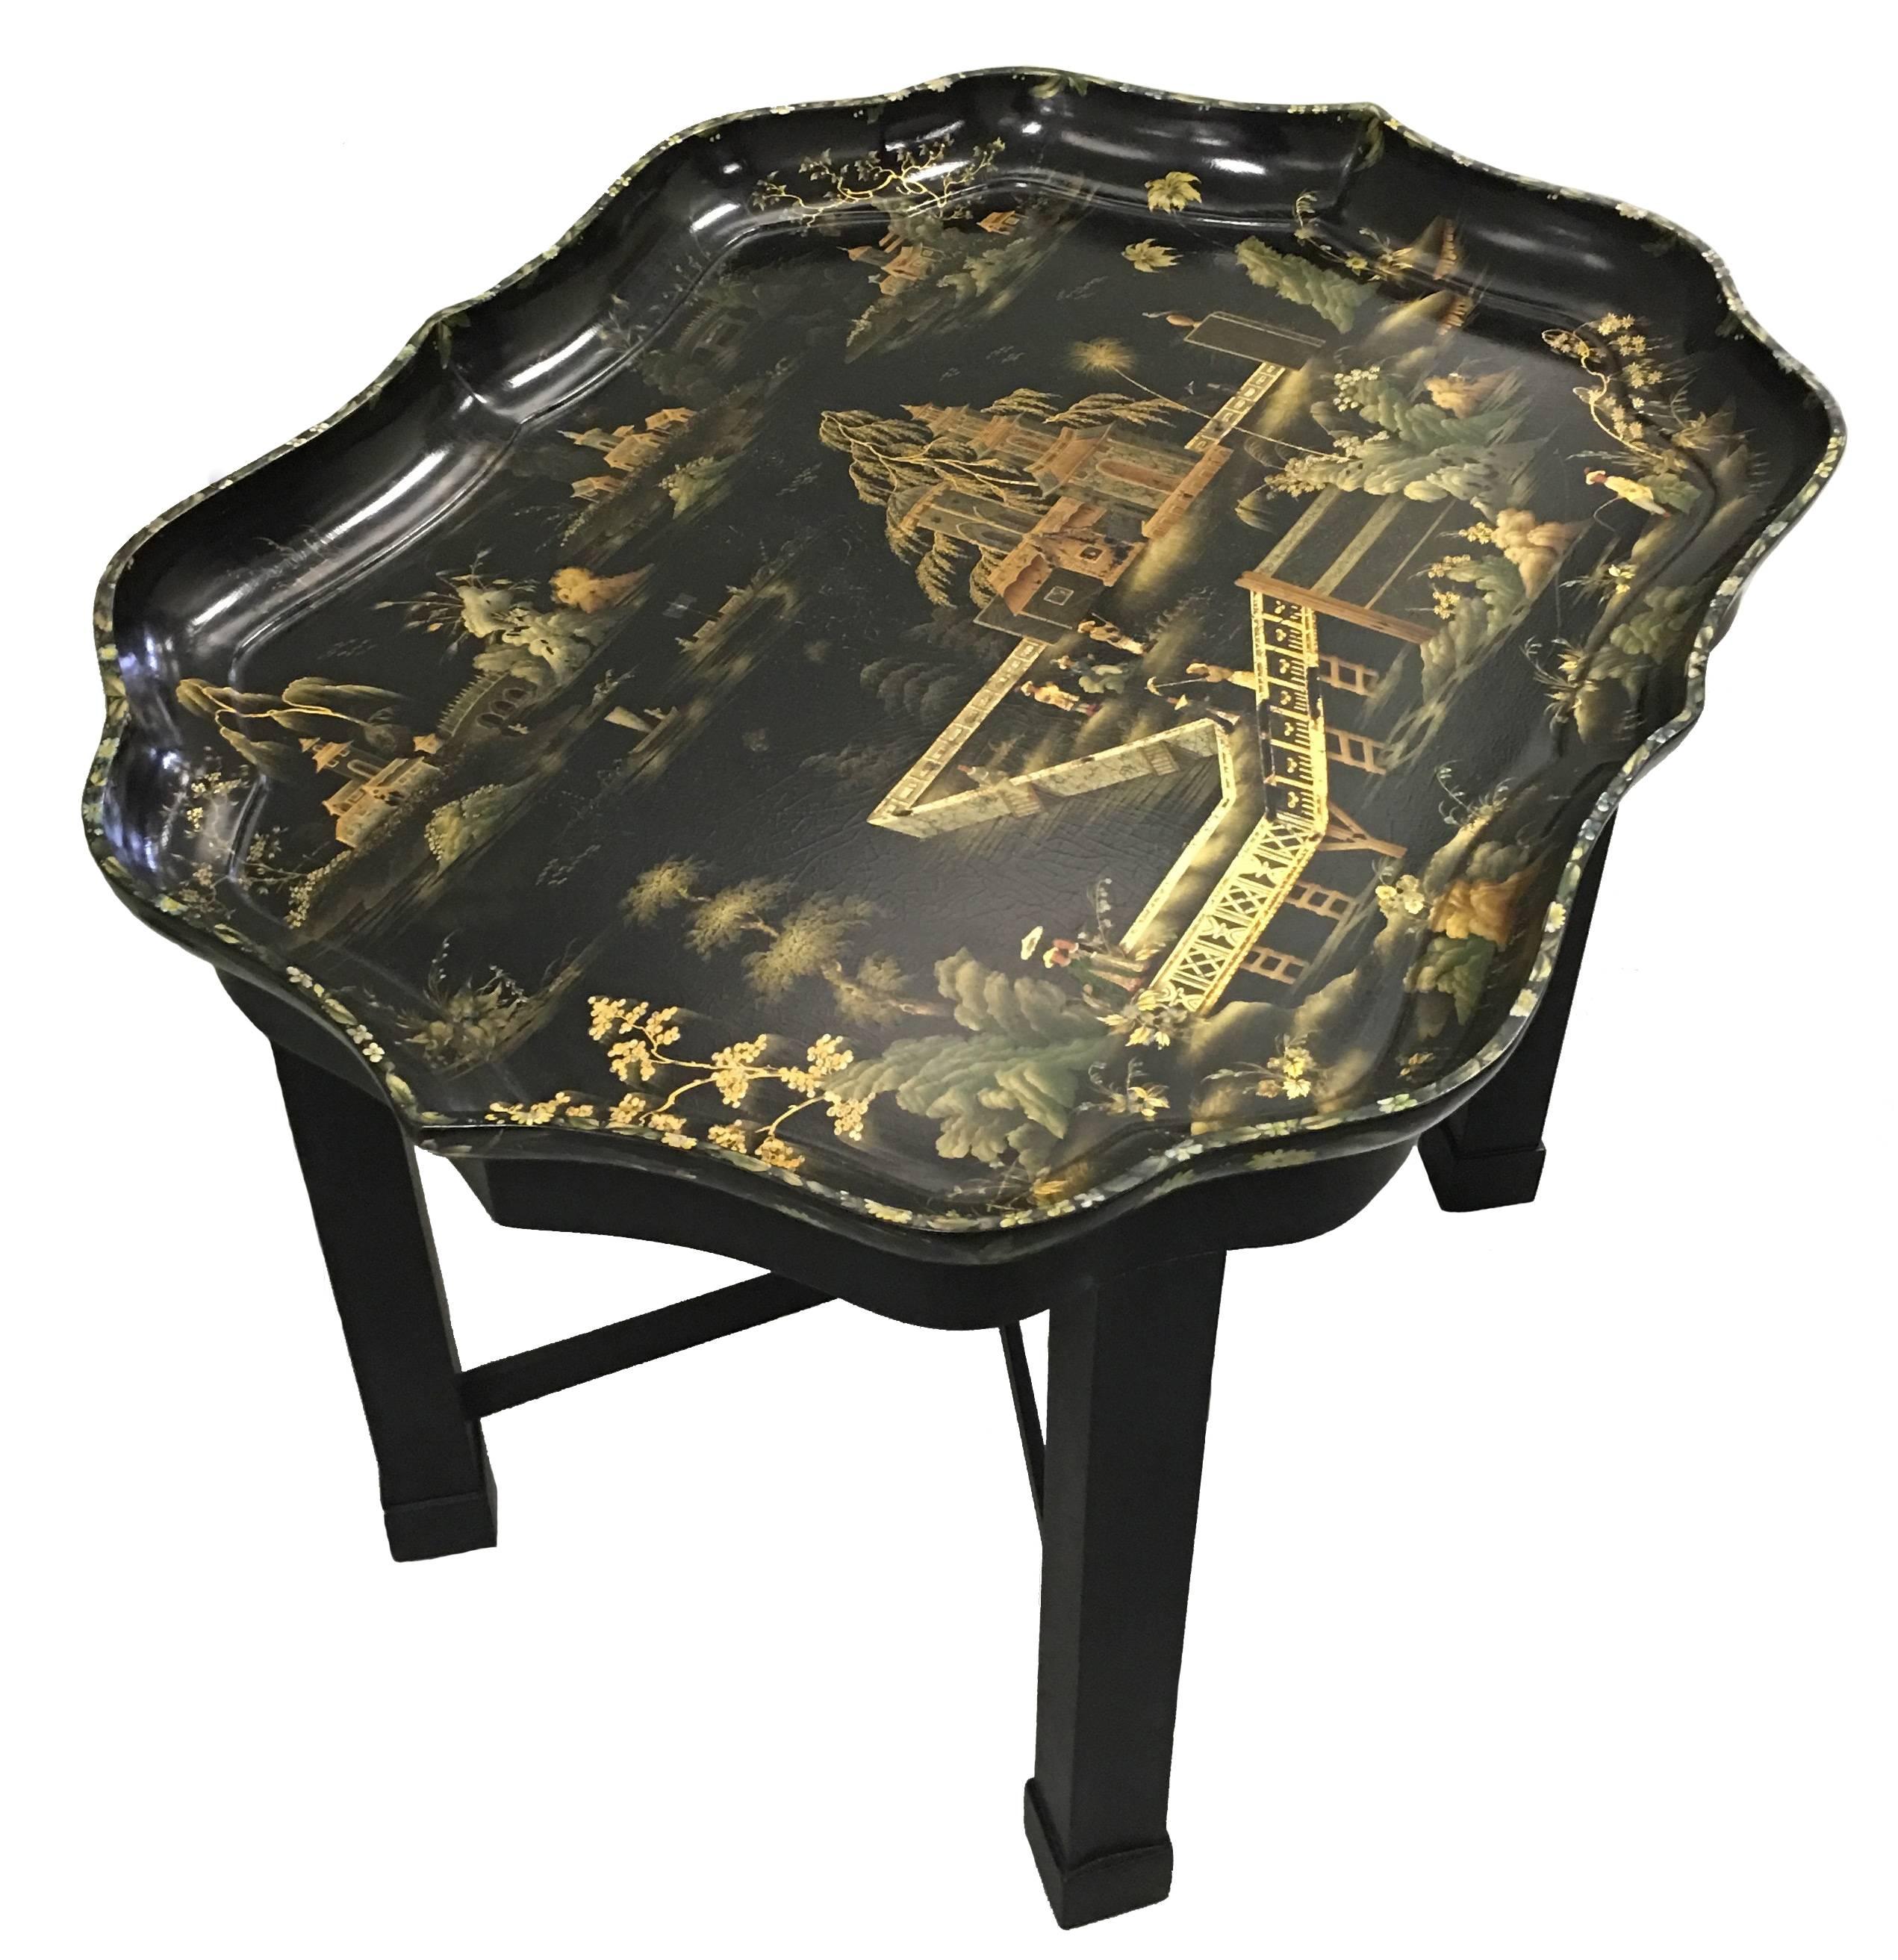 Painted Chinoiserie Papier Mâché Tray on Stand by Henry Clay